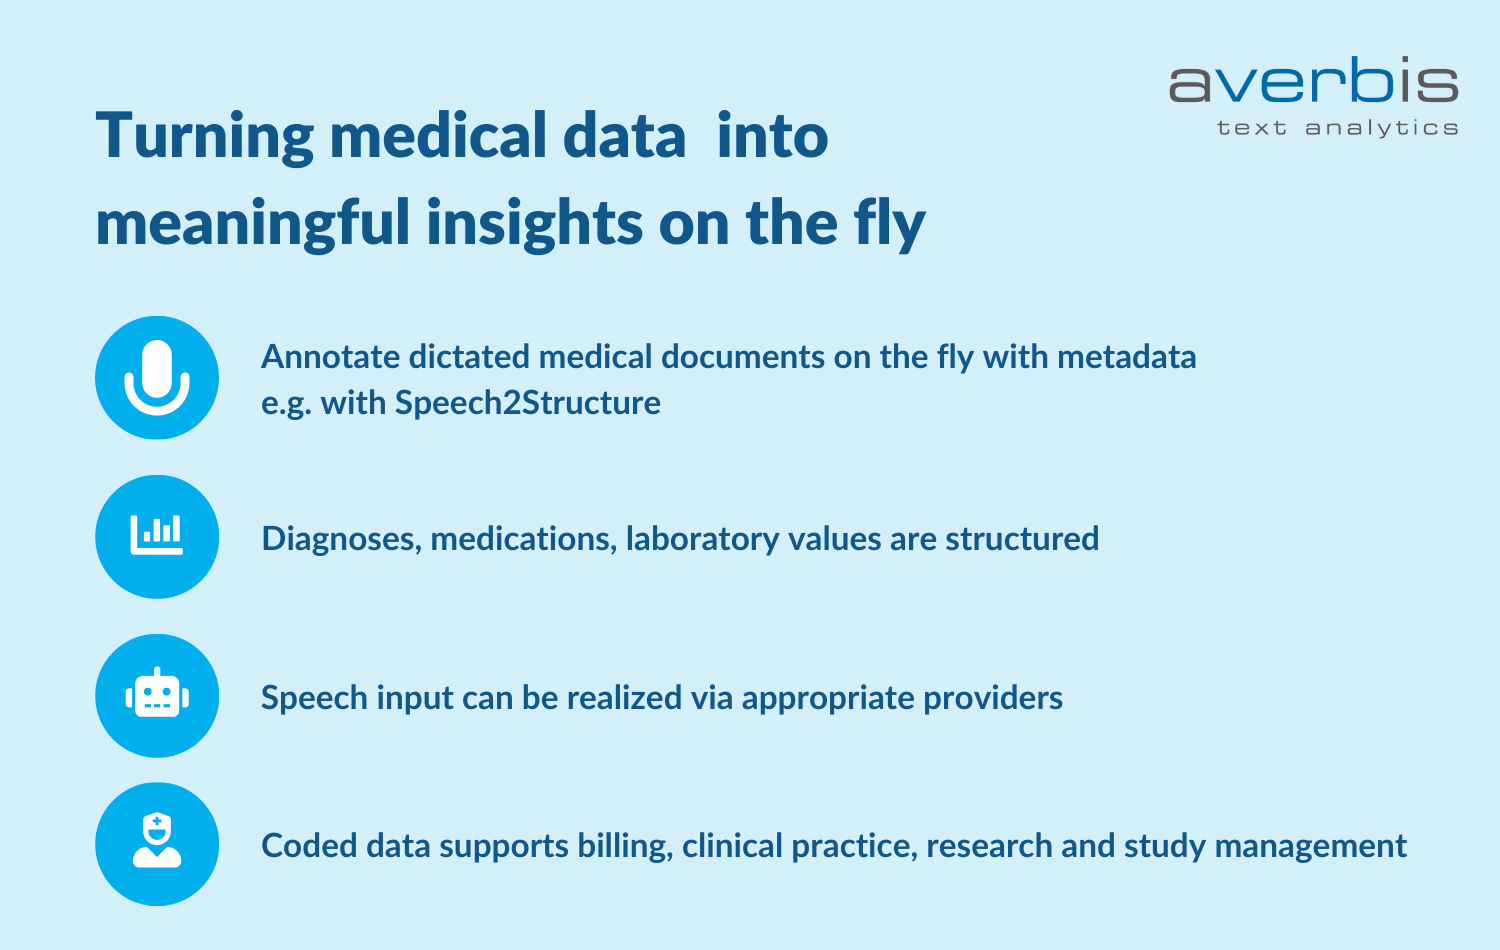 Turning medical data into meaningful insights @Averbis